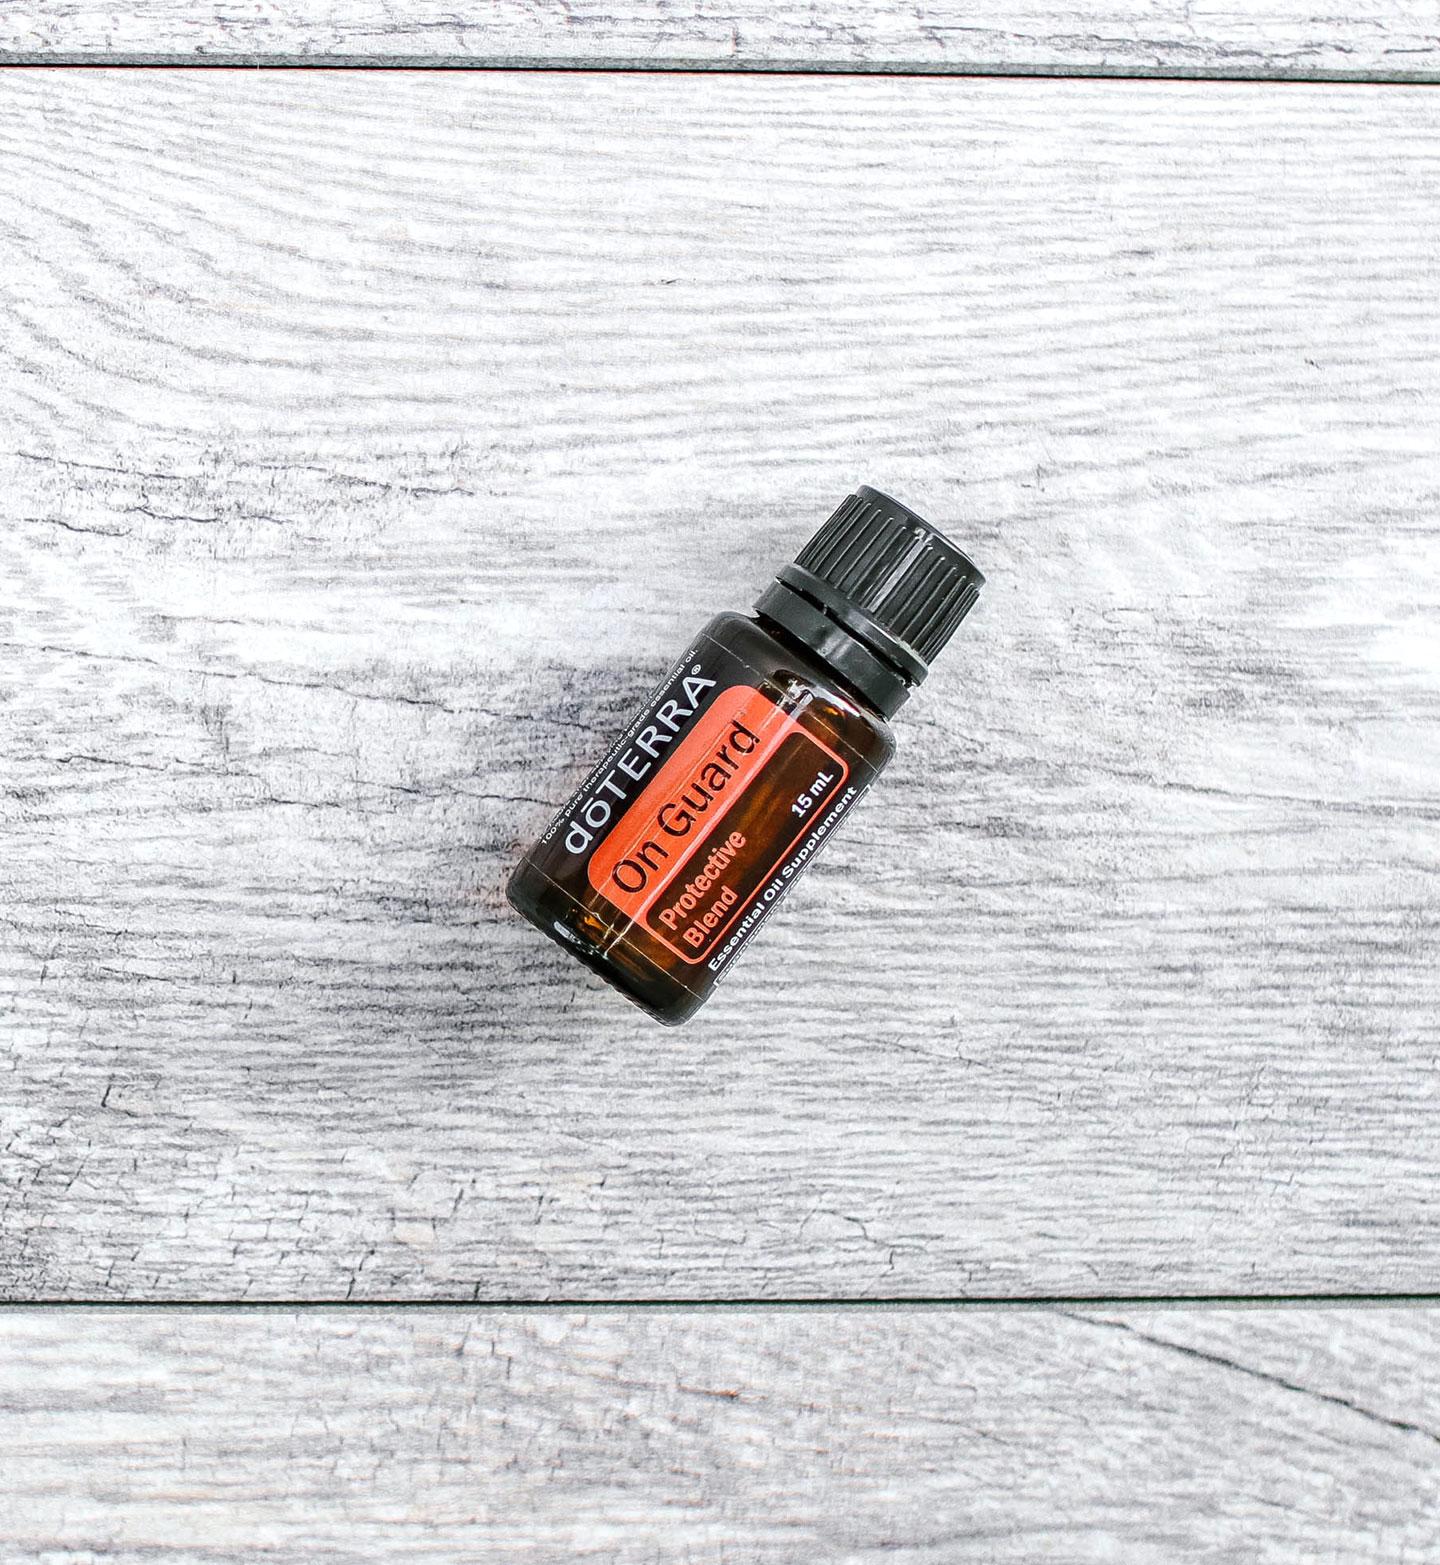 5 Benefits of DoTerra On Guard Essential Oil - Elevays